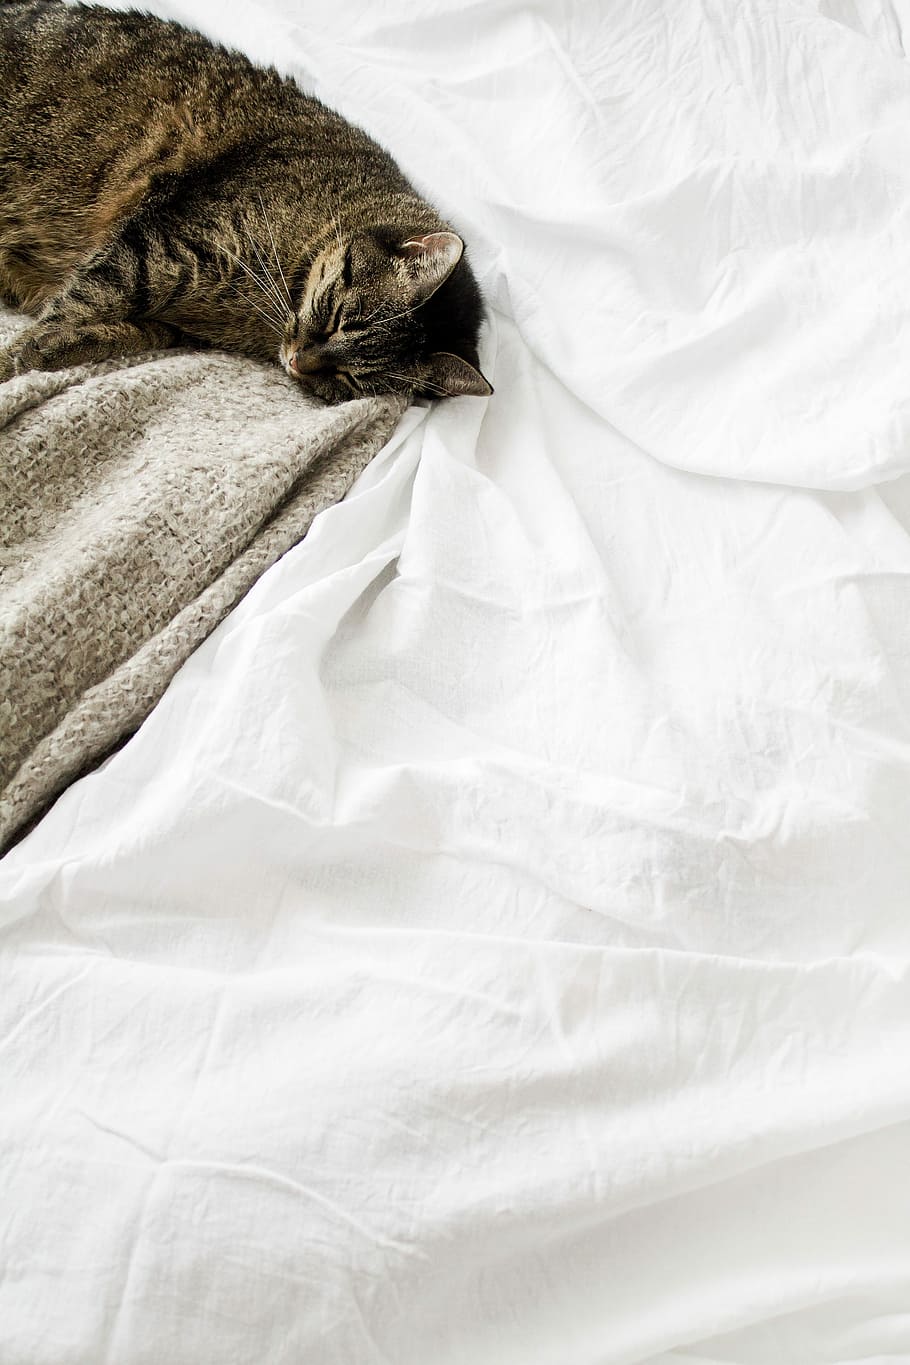 brown tabby cat laying on white textile, tabby cat lying on bed, HD wallpaper